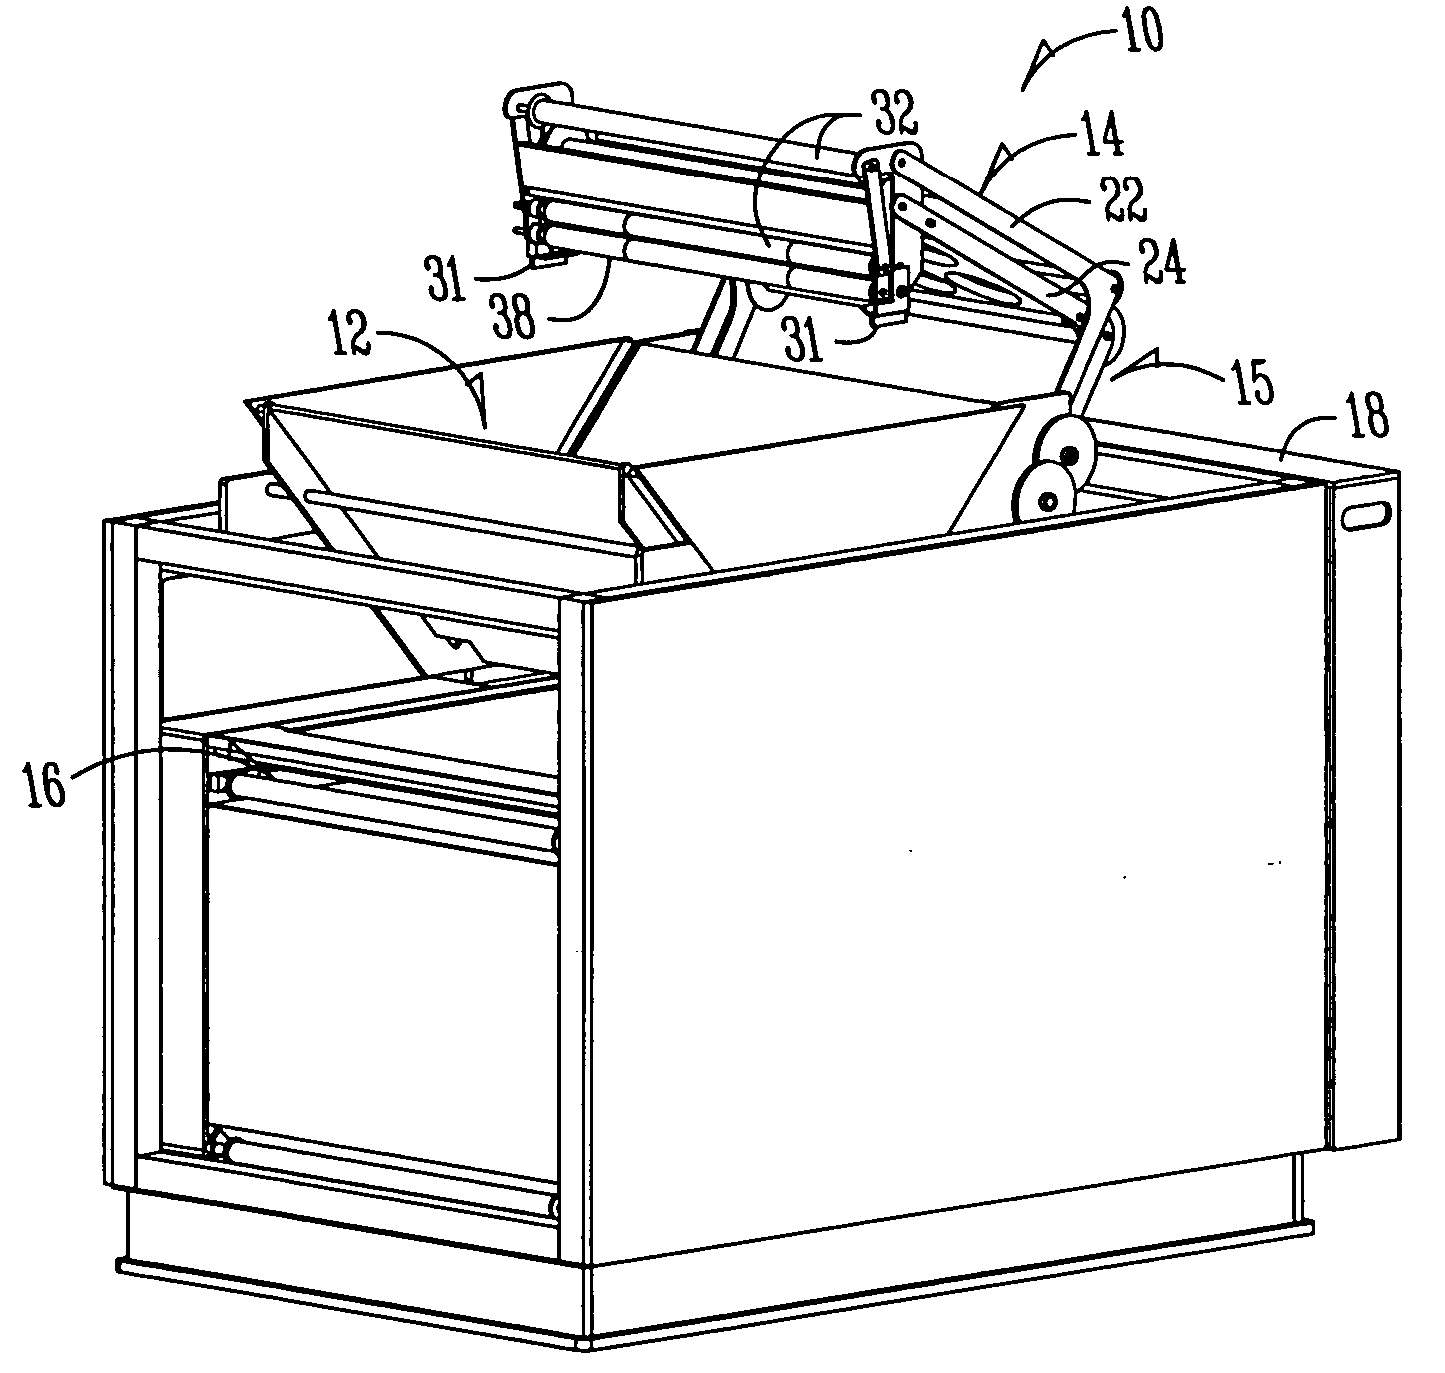 Continuous laundry cleaning appliance